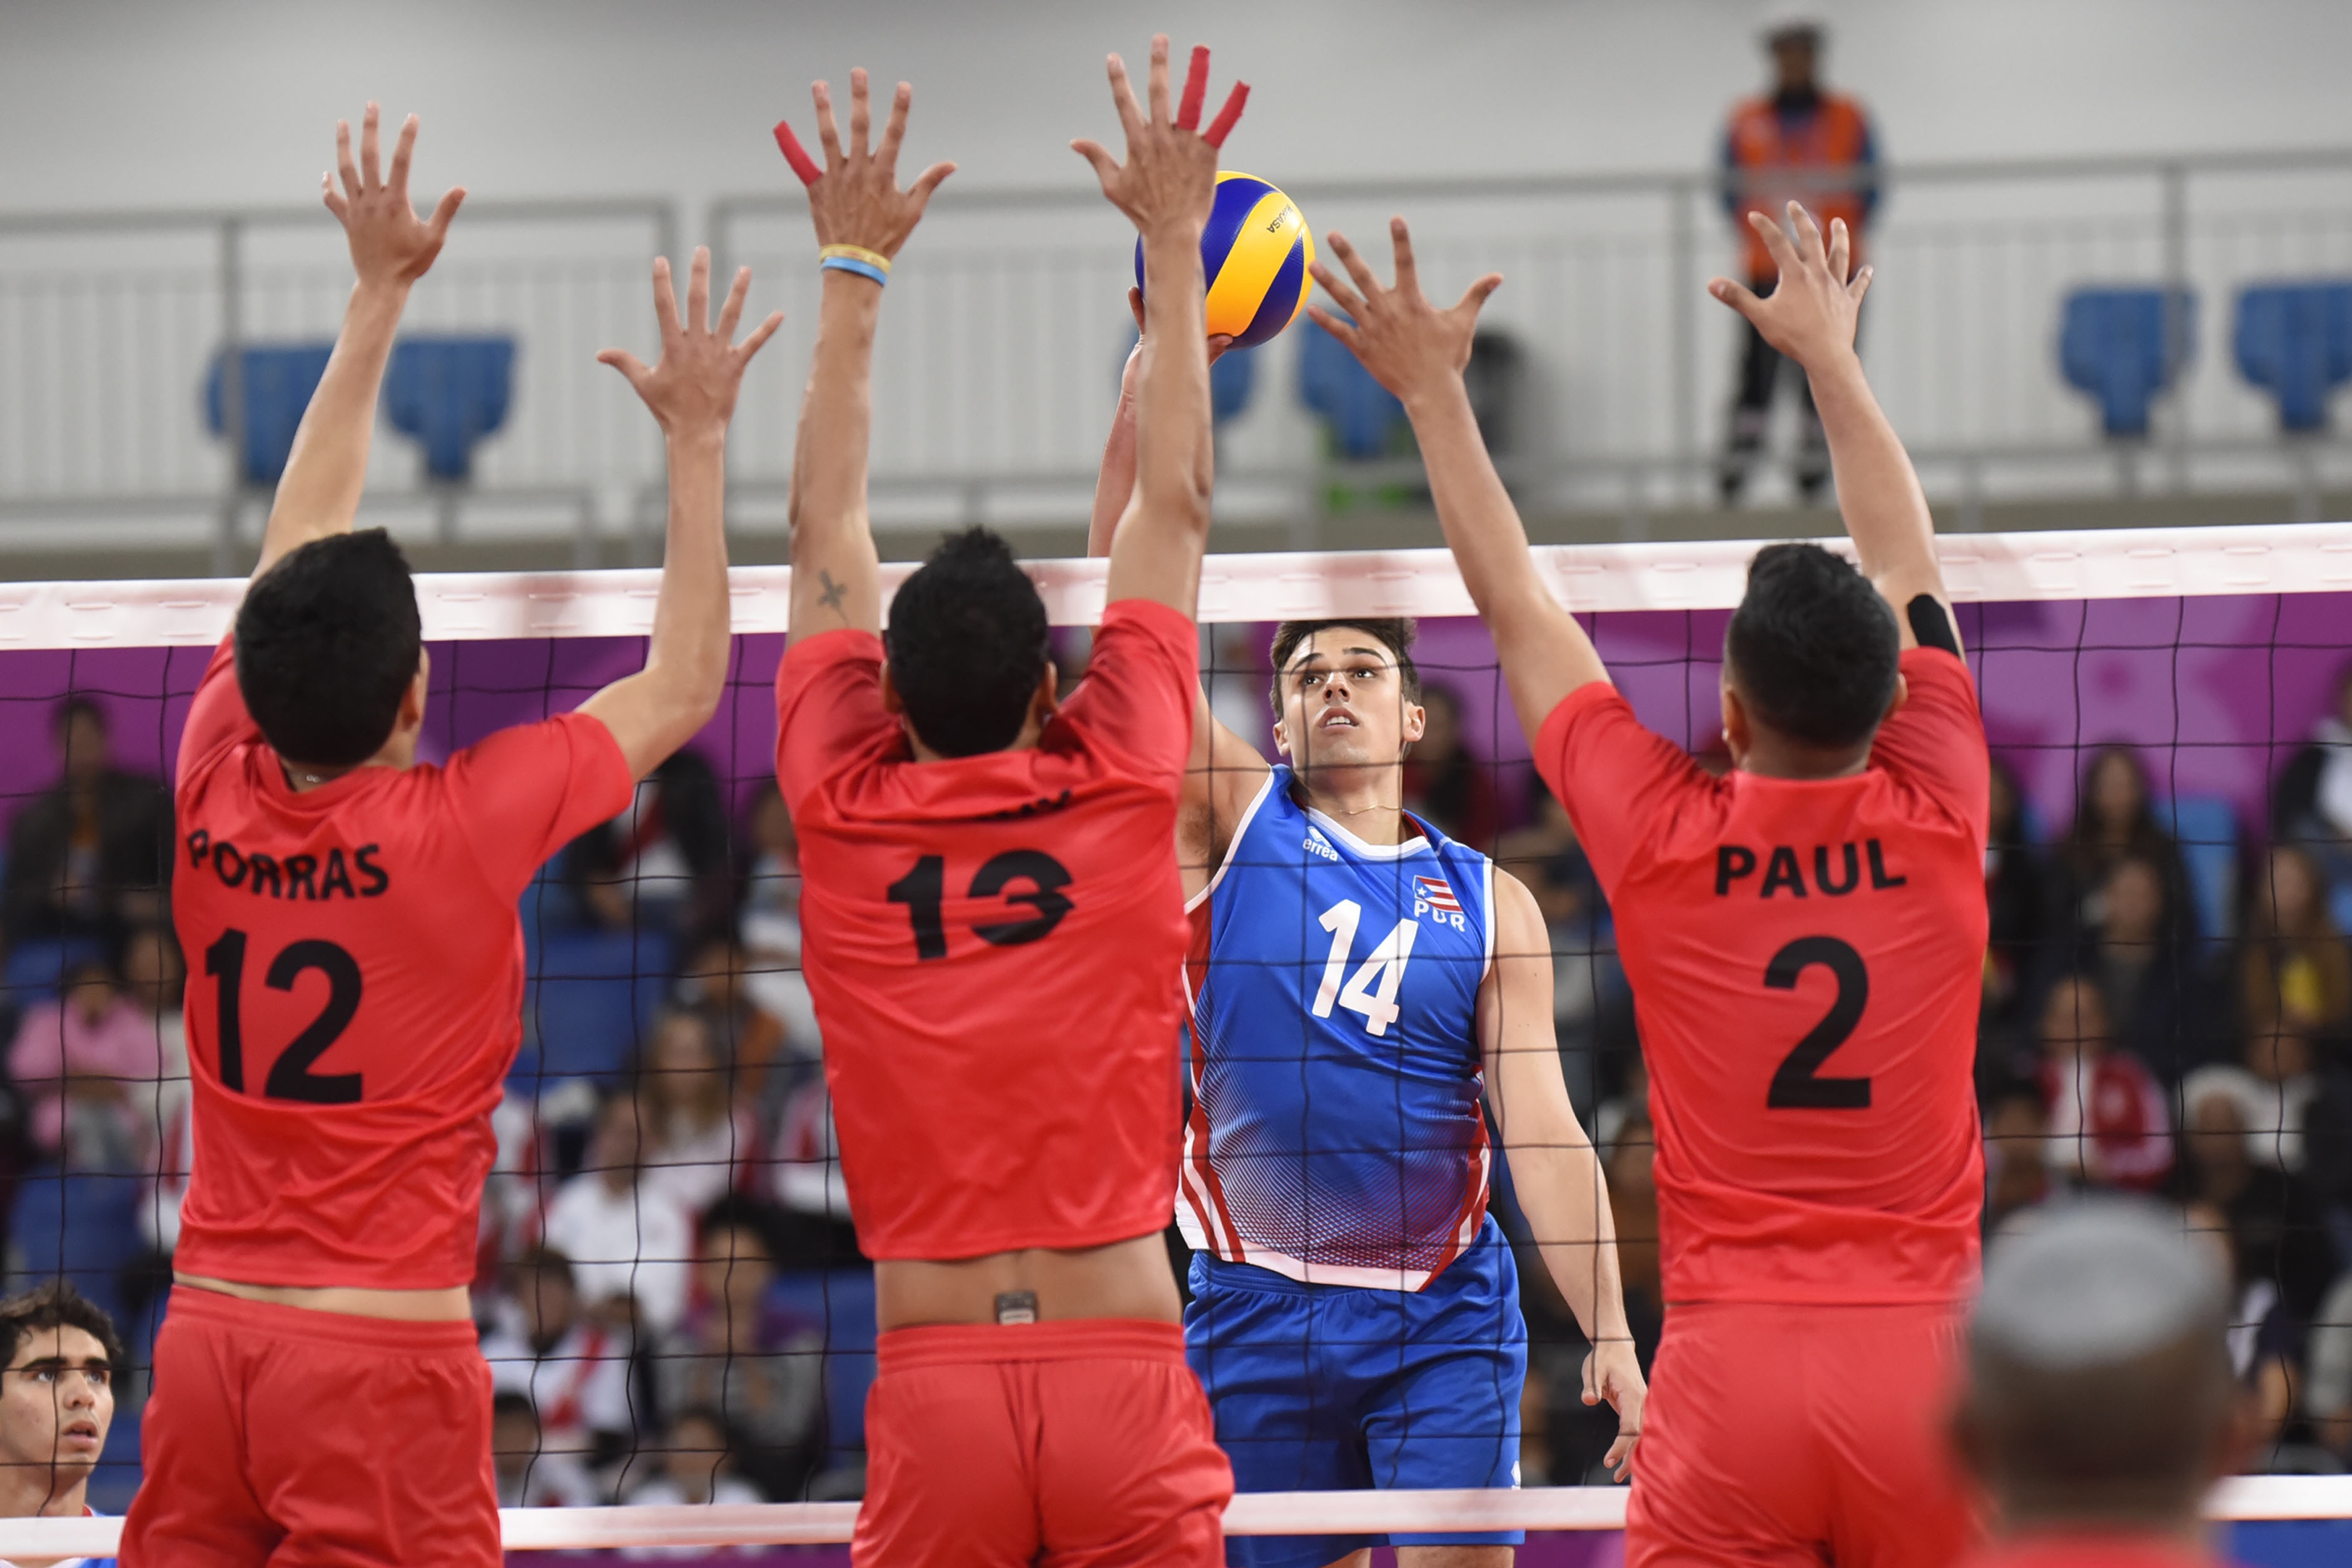 Pan American Games men’s volleyball match results from Wednesday Off